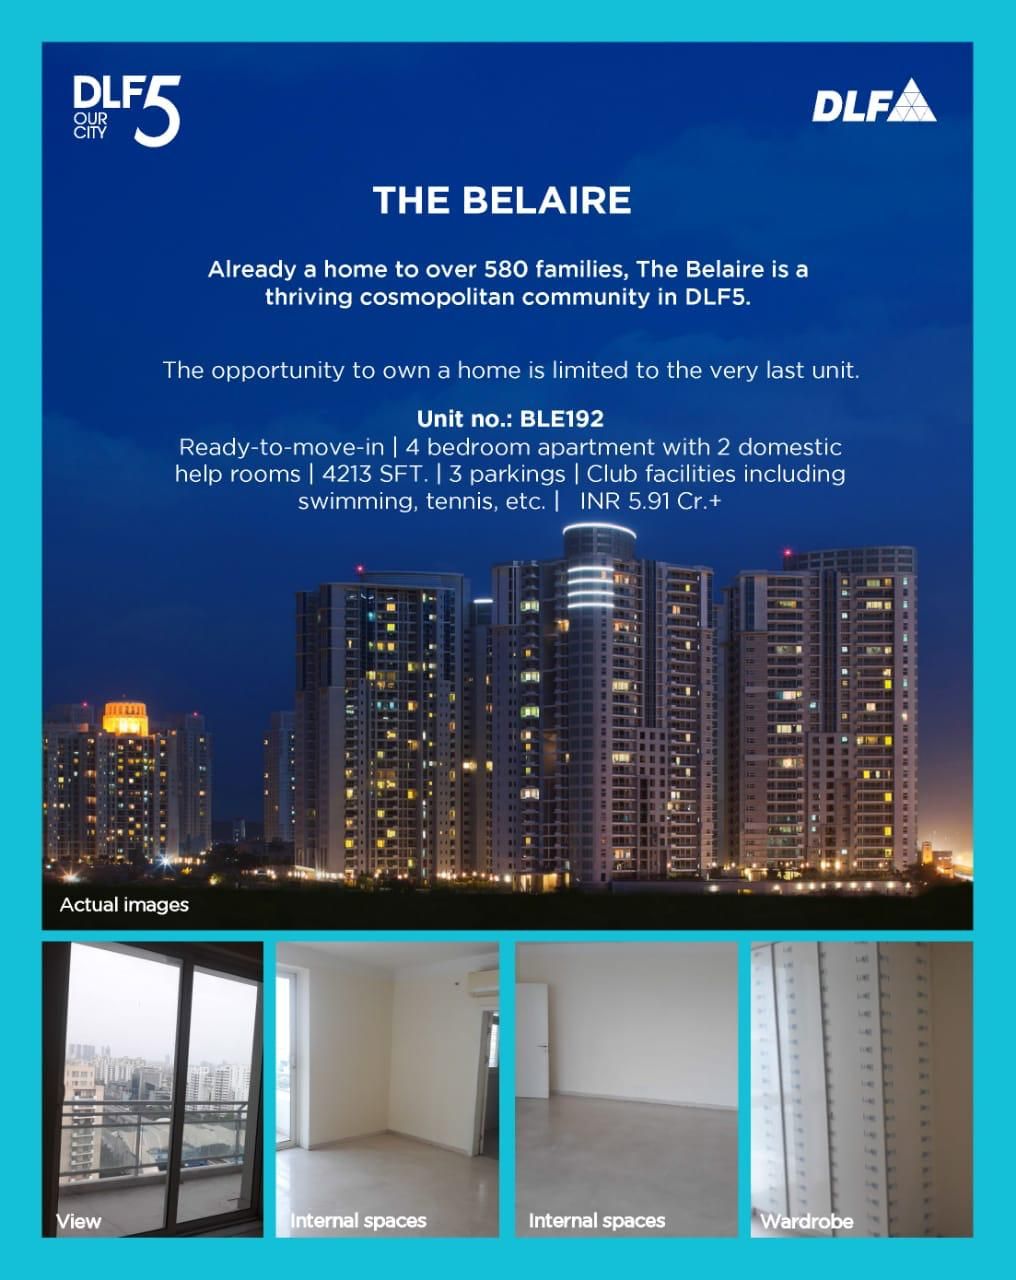 Already a home to over 580 families, The Belaire is a thriving cosmopolitan community in DLF - 5, Gurgaon Update